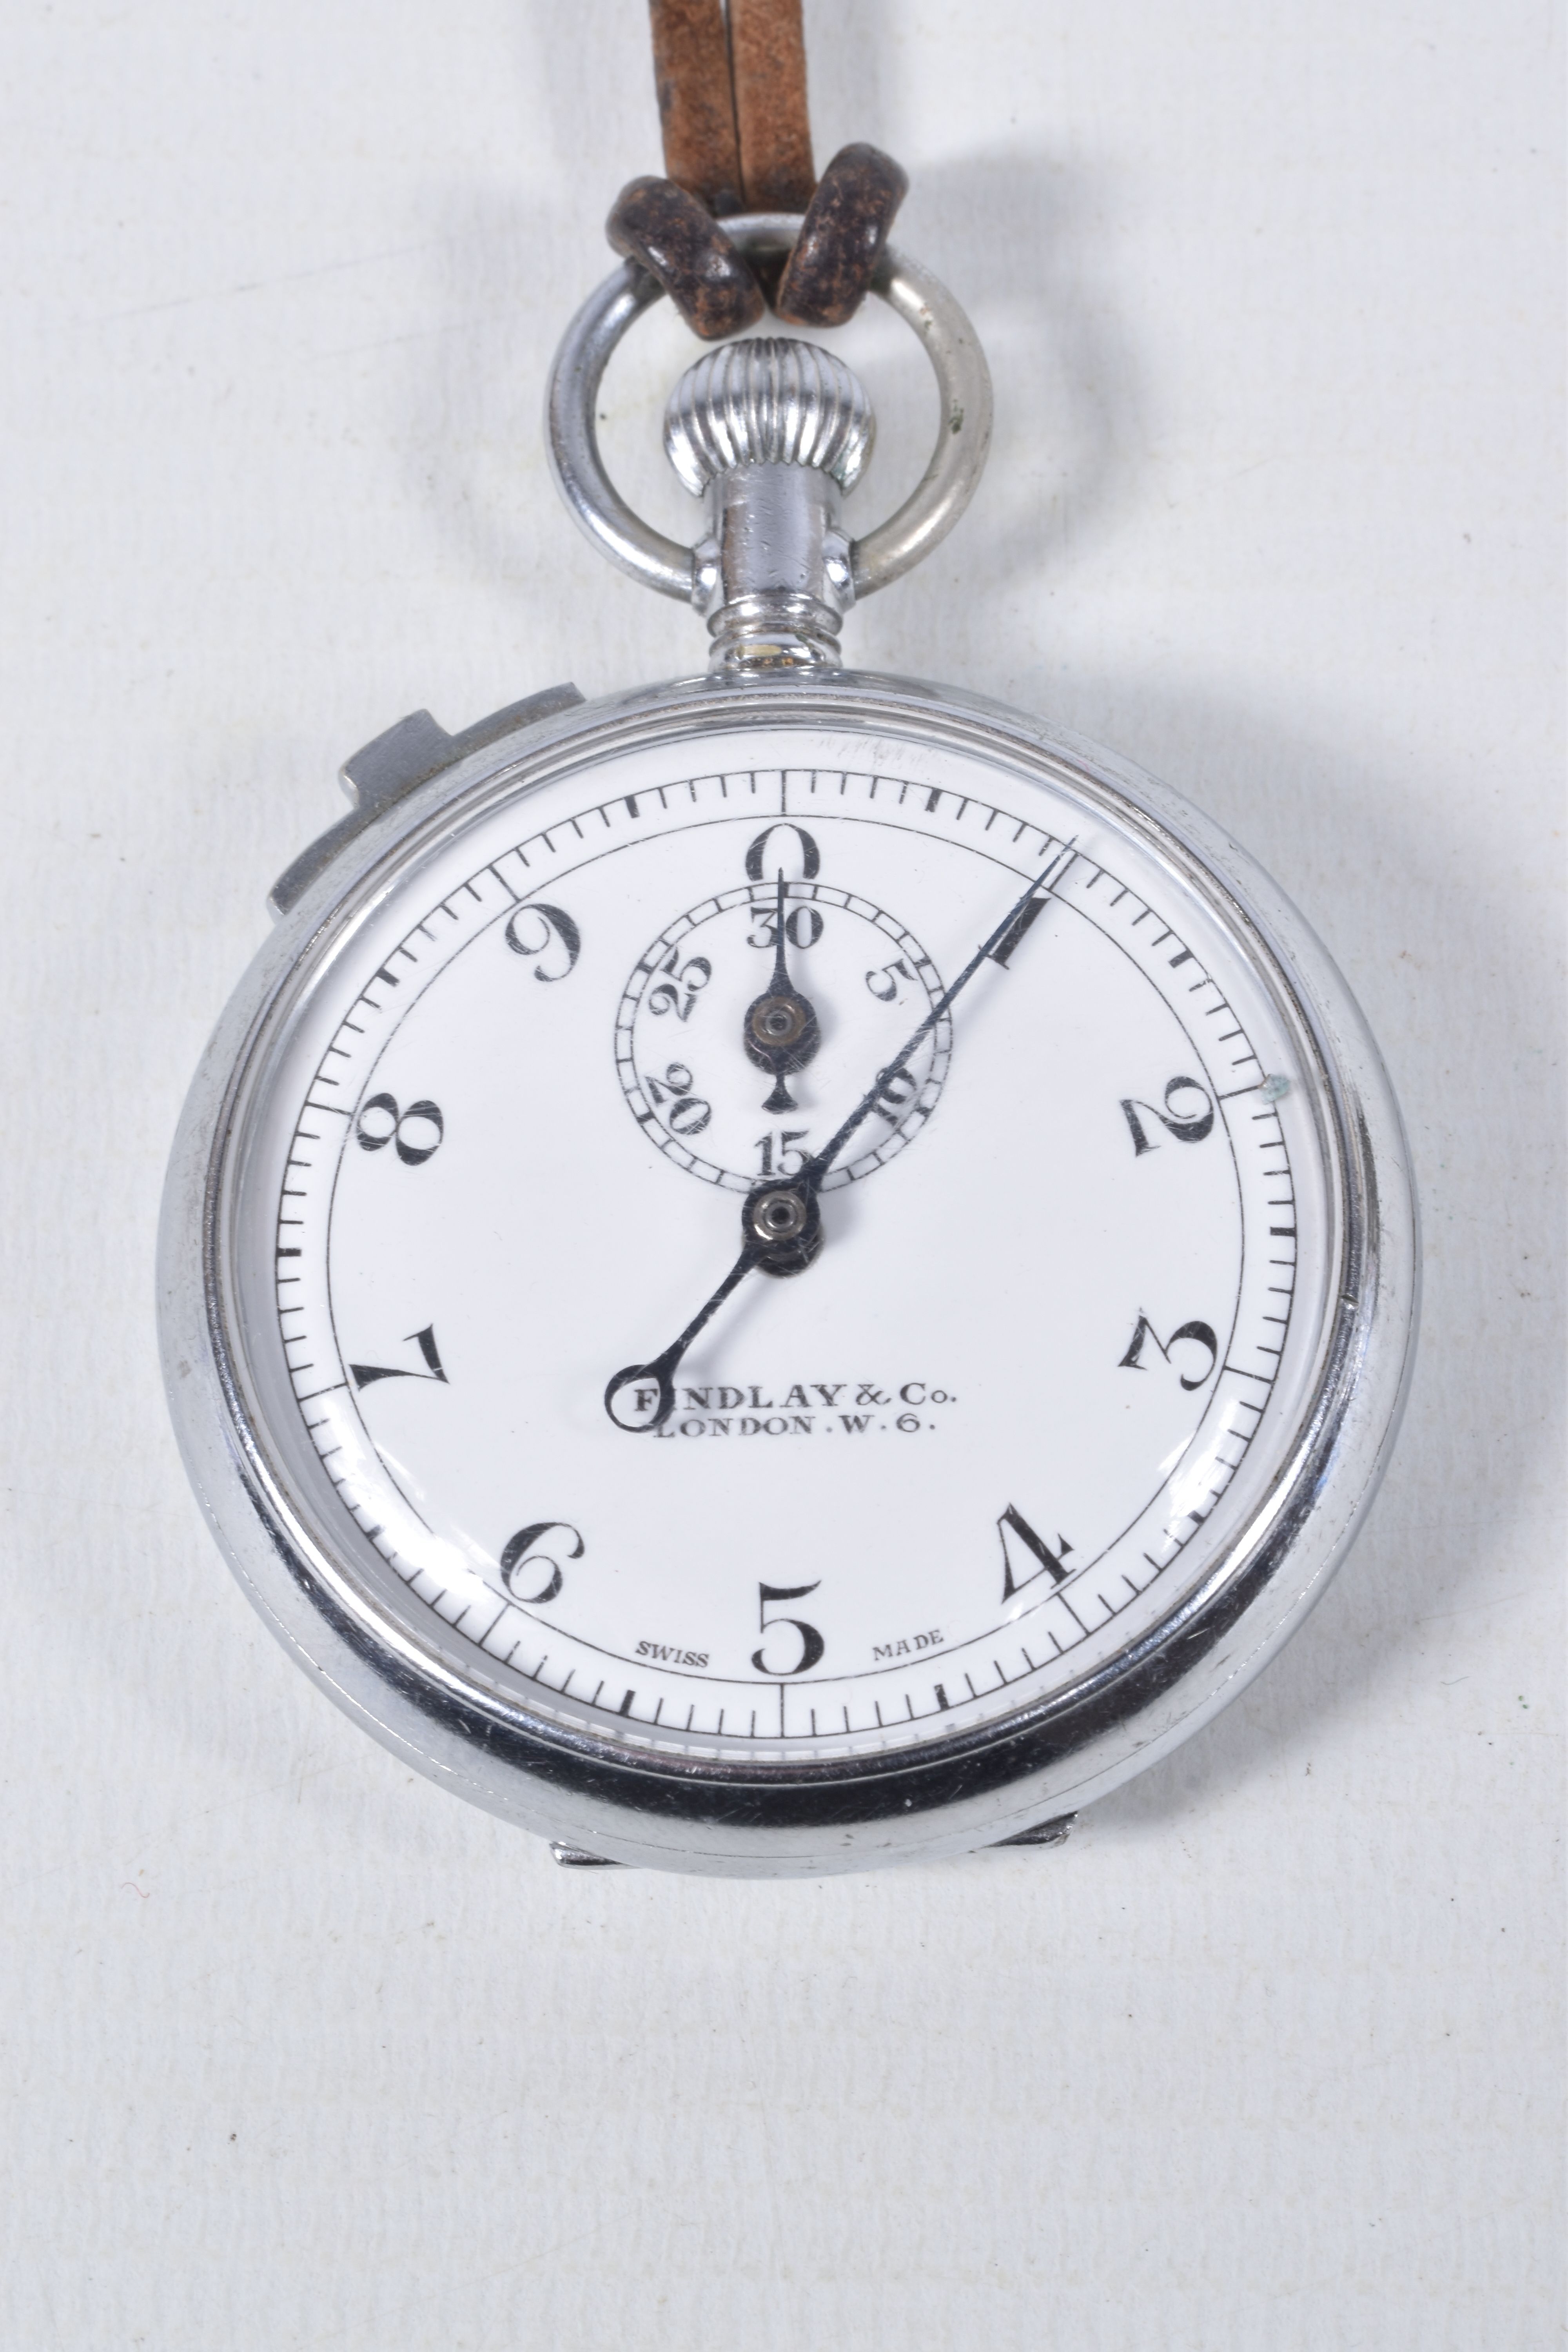 A 'FINDLAY & CO' STOP WATCH AND A PADLOCK, base metal stop watch, together with a base metal padlock - Image 3 of 7